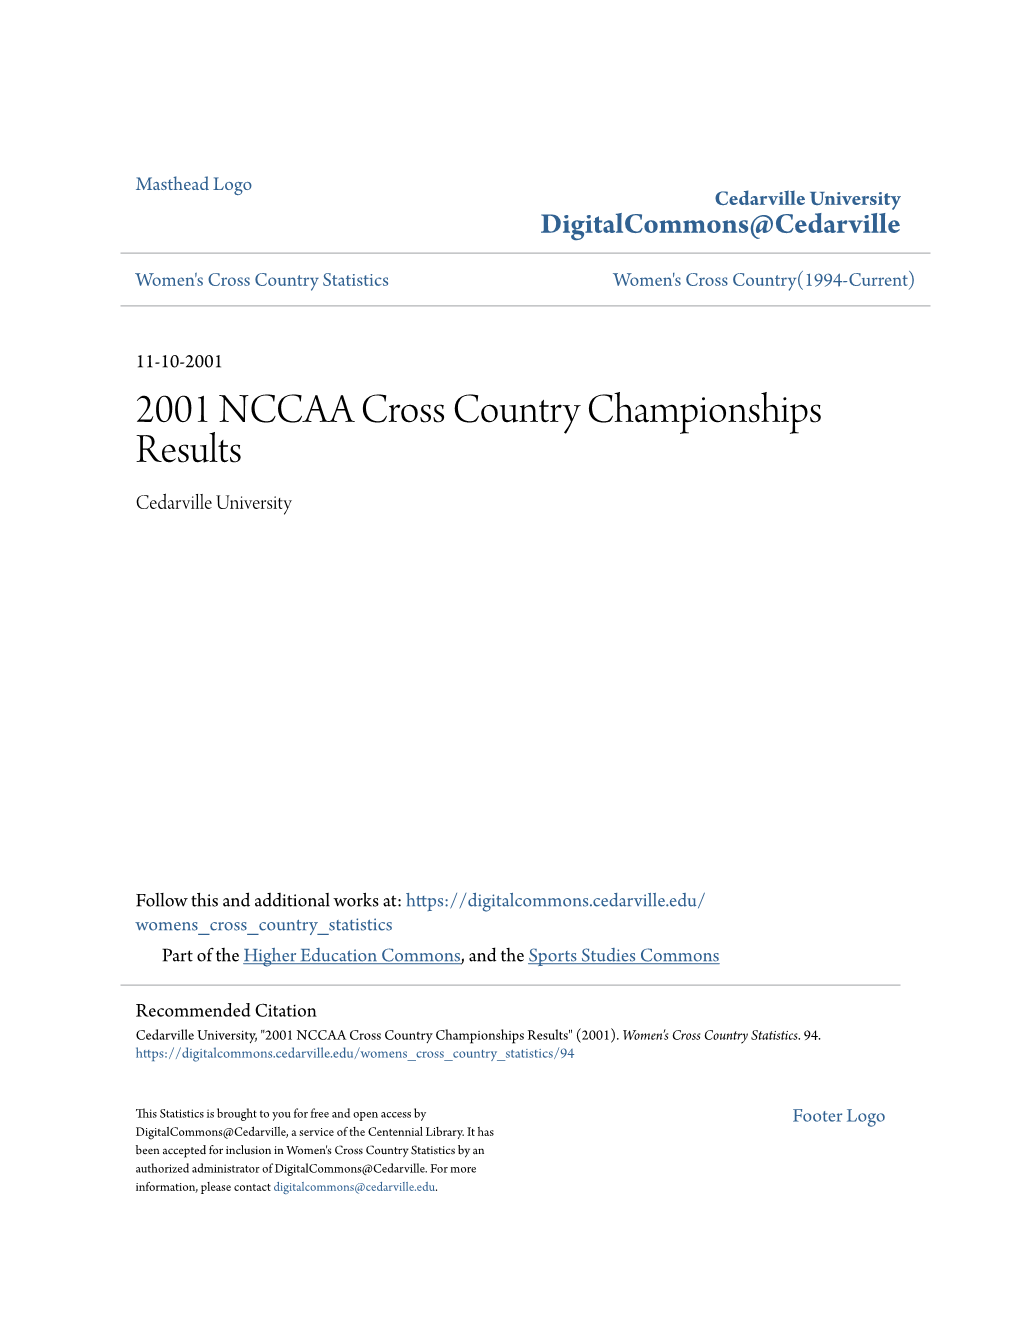 2001 NCCAA Cross Country Championships Results Cedarville University